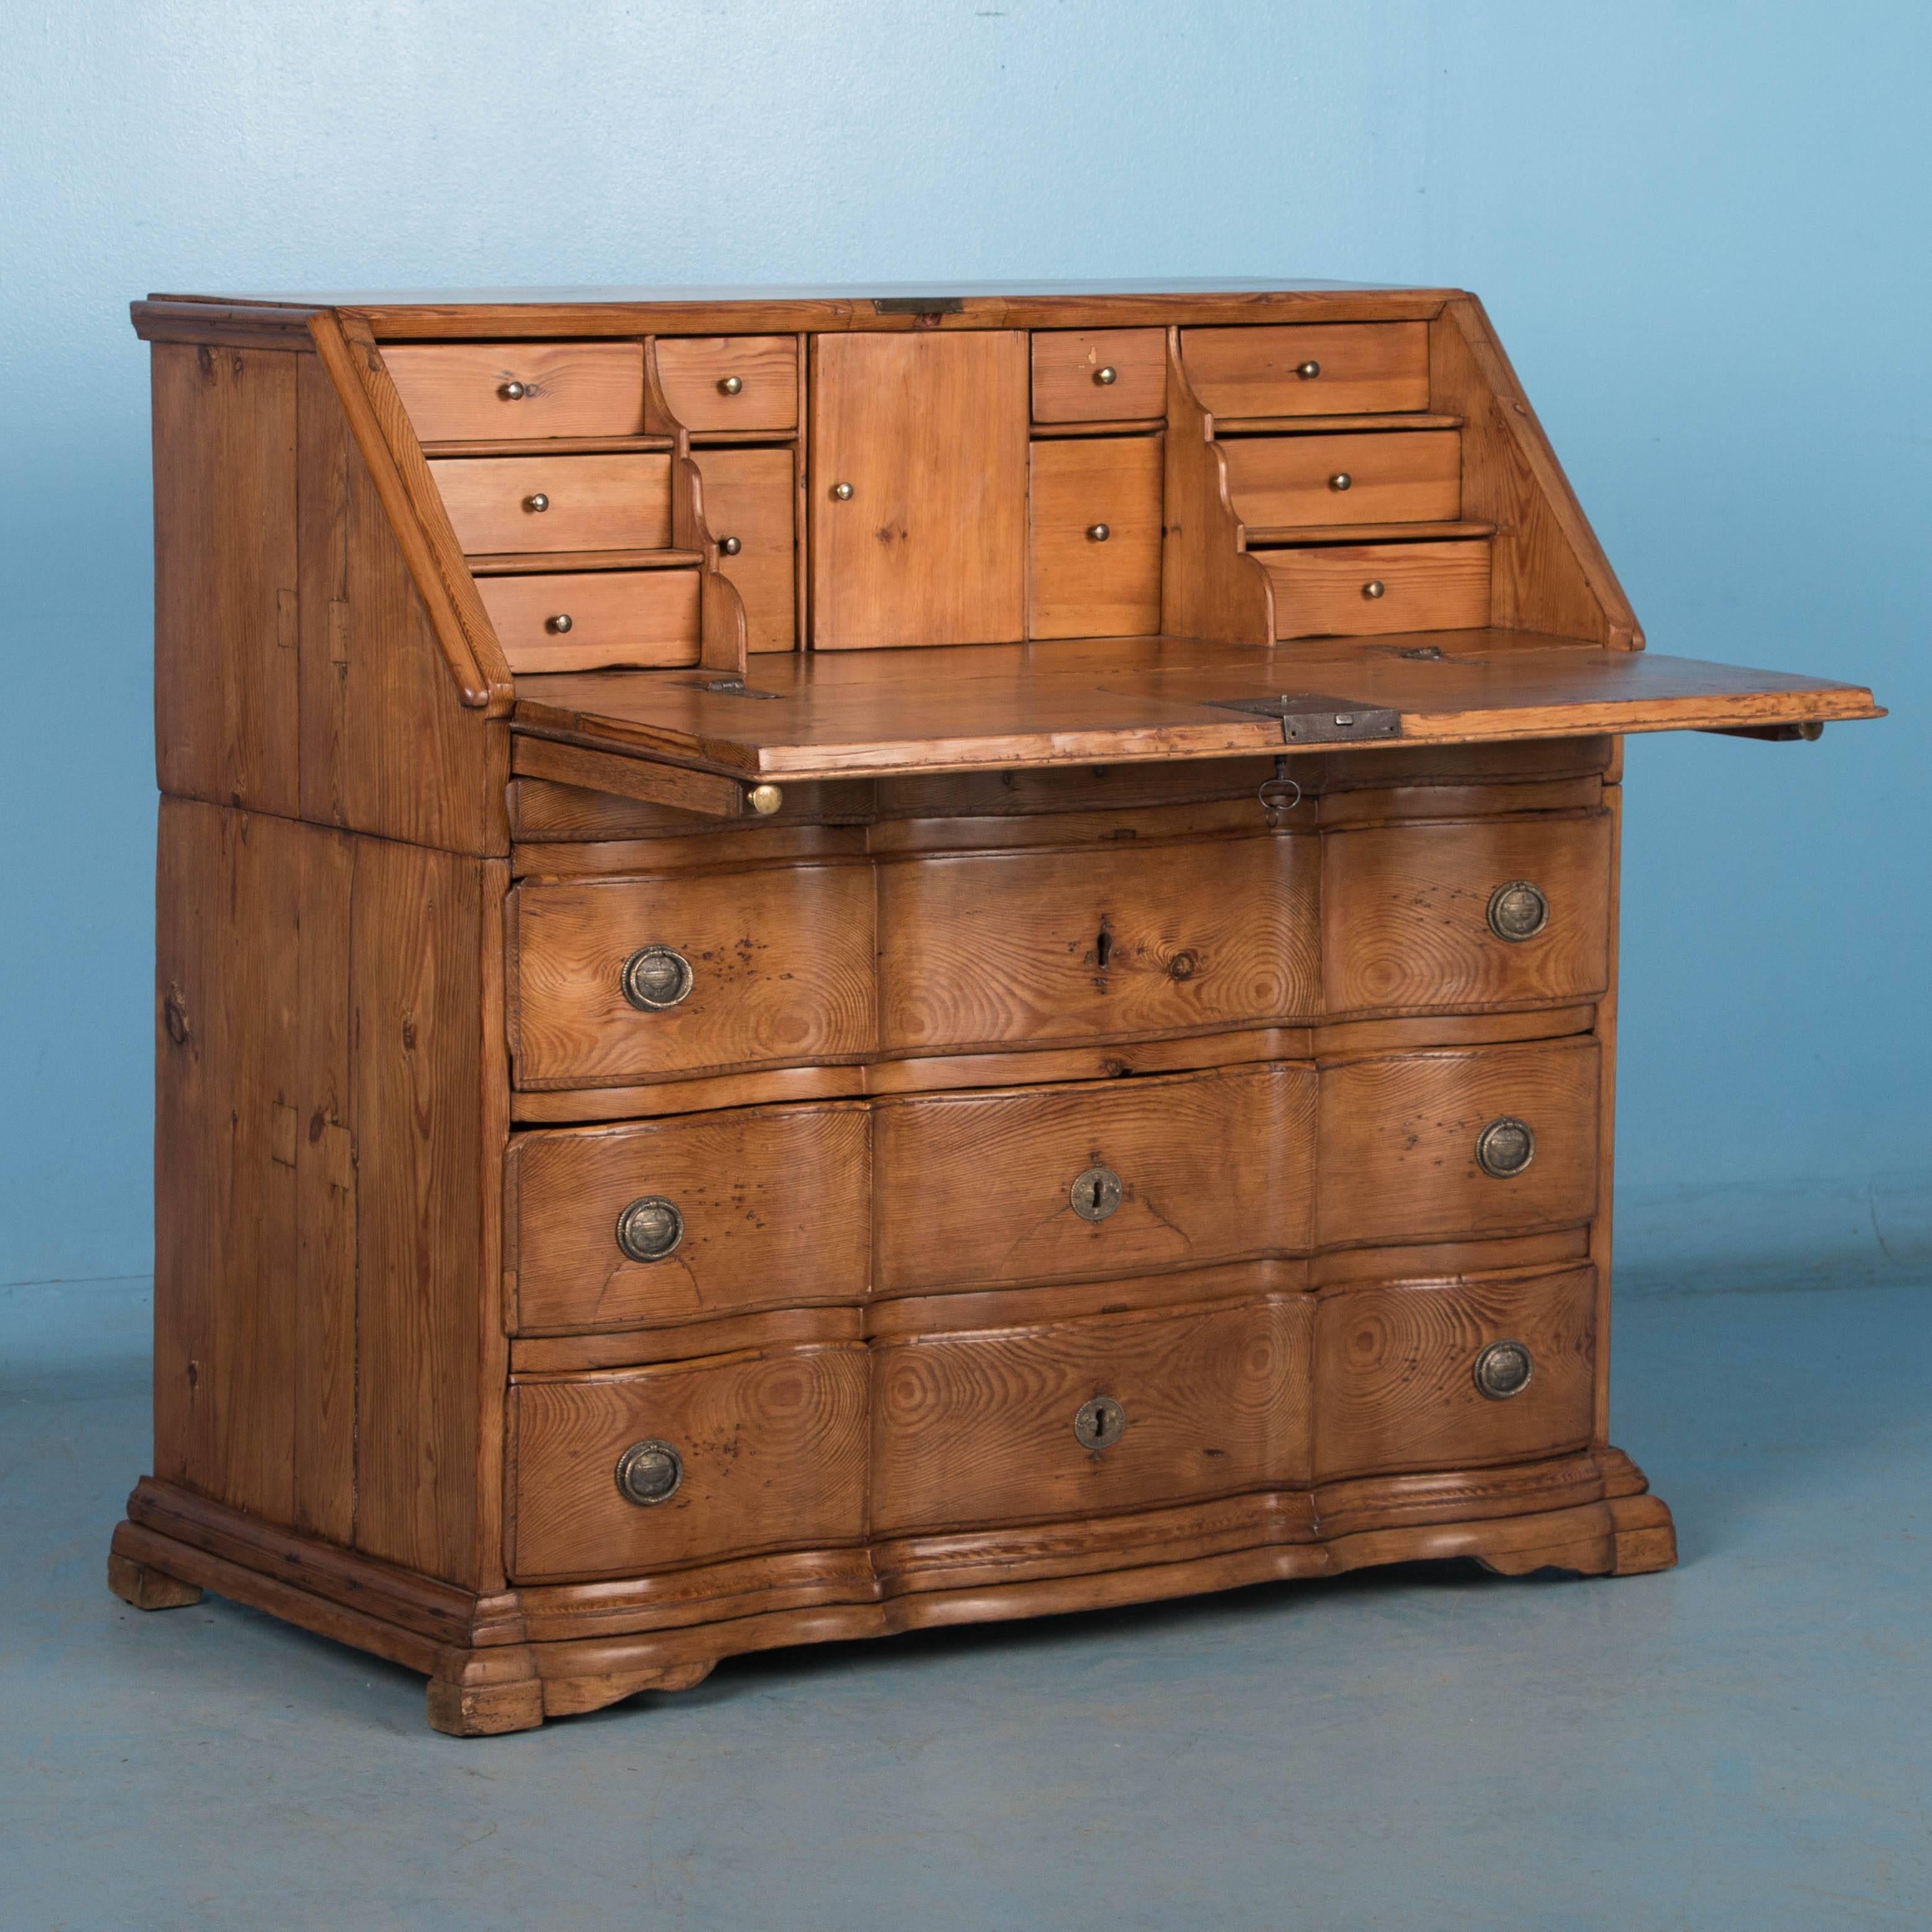 It is the deep, rich patina of the aged pine that first captures your attention in this stunning secretary, also known as a bureau, from the late 18th century.  The curved large 3 lower drawers reflect the Baroque period, while the 10 petite drawers